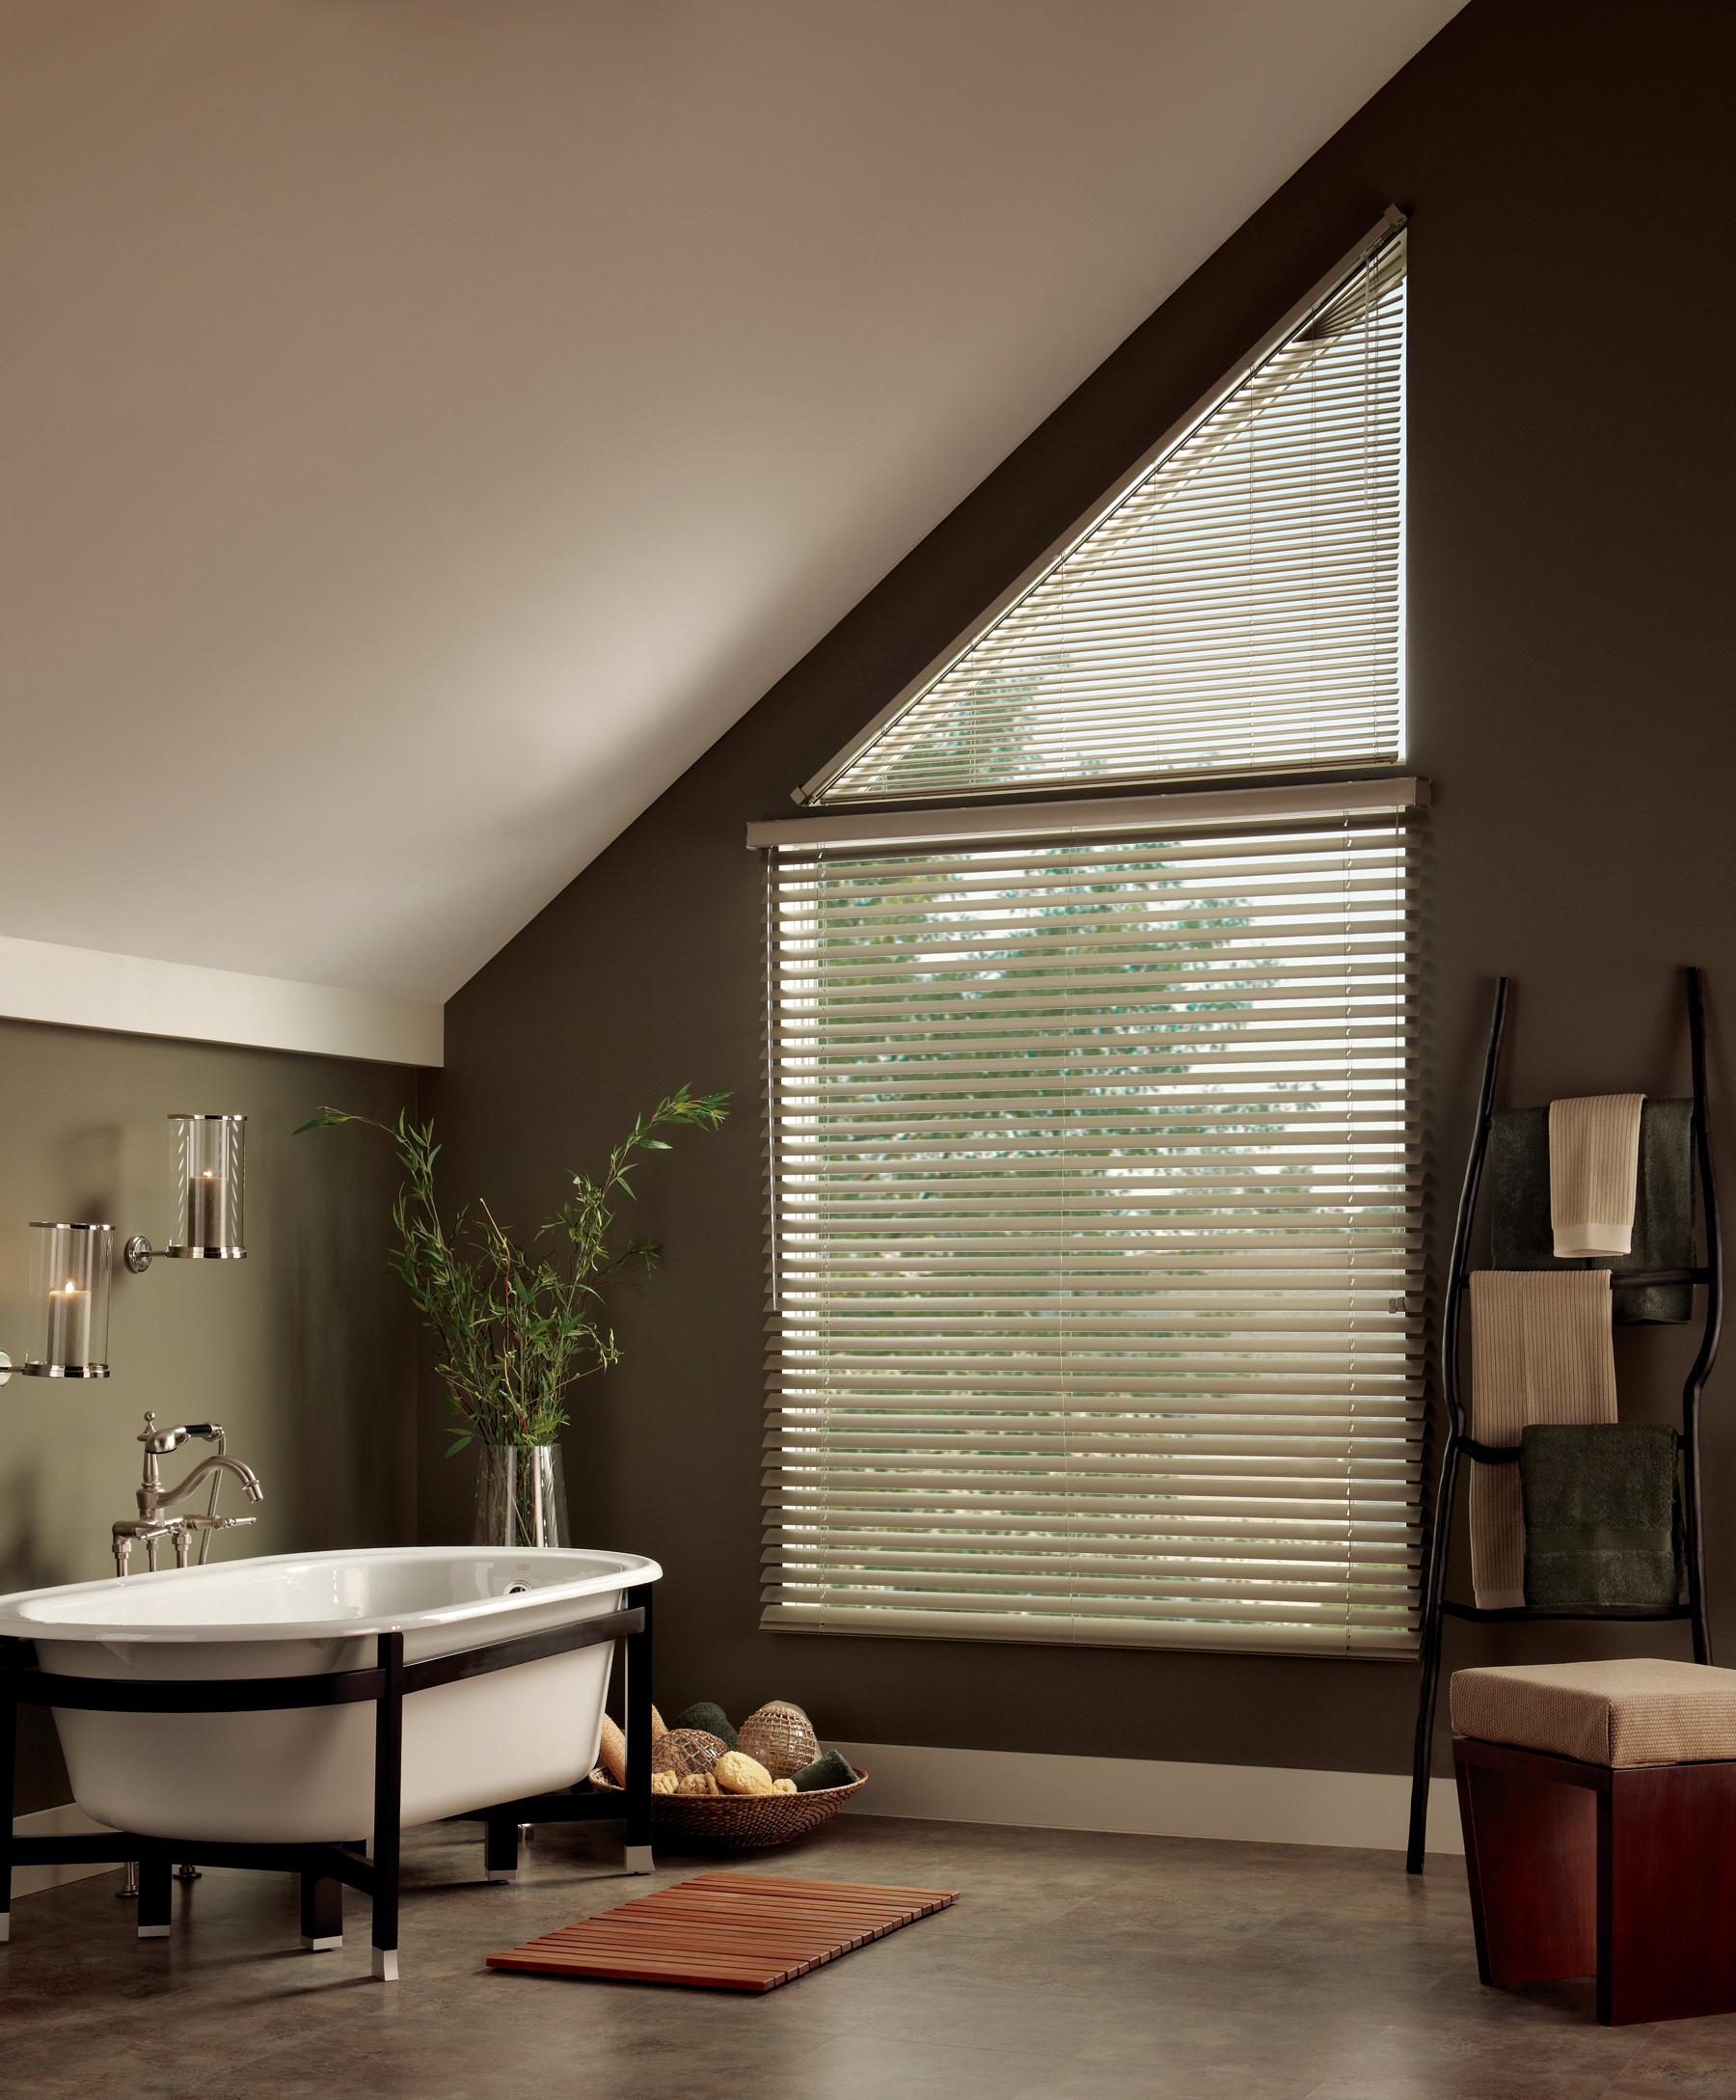 Aluminum blinds in any custom shape! Yah, we can handle that!